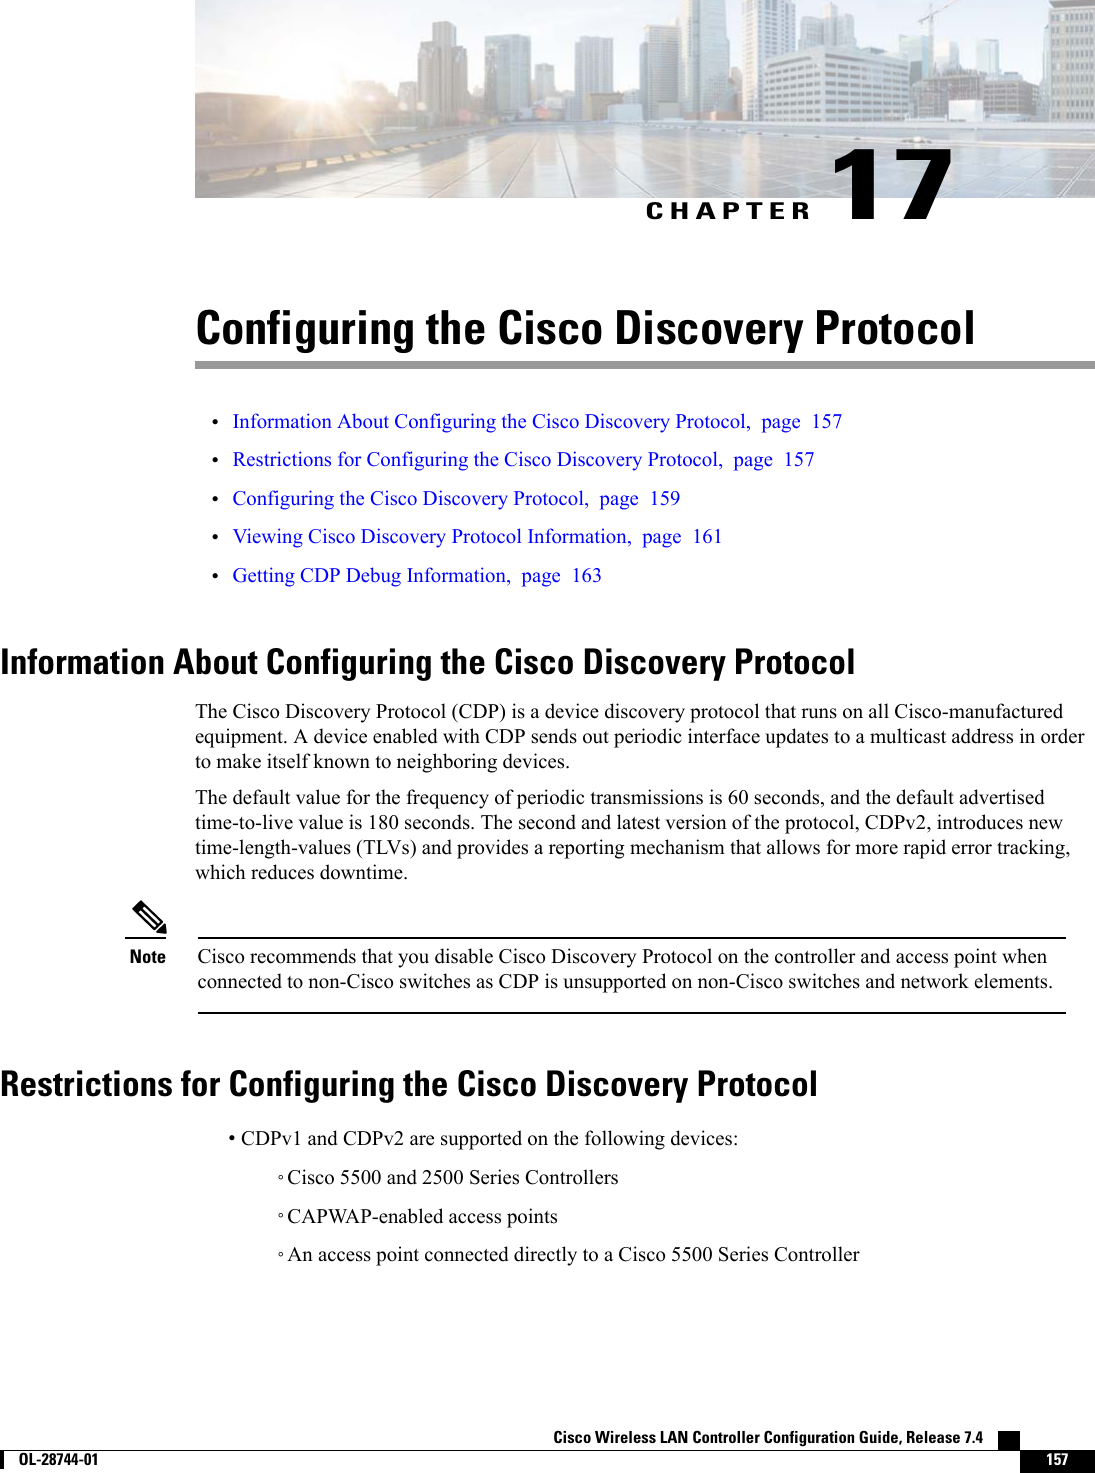 CHAPTER 17Configuring the Cisco Discovery Protocol•Information About Configuring the Cisco Discovery Protocol, page 157•Restrictions for Configuring the Cisco Discovery Protocol, page 157•Configuring the Cisco Discovery Protocol, page 159•Viewing Cisco Discovery Protocol Information, page 161•Getting CDP Debug Information, page 163Information About Configuring the Cisco Discovery ProtocolThe Cisco Discovery Protocol (CDP) is a device discovery protocol that runs on all Cisco-manufacturedequipment. A device enabled with CDP sends out periodic interface updates to a multicast address in orderto make itself known to neighboring devices.The default value for the frequency of periodic transmissions is 60 seconds, and the default advertisedtime-to-live value is 180 seconds. The second and latest version of the protocol, CDPv2, introduces newtime-length-values (TLVs) and provides a reporting mechanism that allows for more rapid error tracking,which reduces downtime.Cisco recommends that you disable Cisco Discovery Protocol on the controller and access point whenconnected to non-Cisco switches as CDP is unsupported on non-Cisco switches and network elements.NoteRestrictions for Configuring the Cisco Discovery Protocol•CDPv1 and CDPv2 are supported on the following devices:◦Cisco 5500 and 2500 Series Controllers◦CAPWAP-enabled access points◦An access point connected directly to a Cisco 5500 Series ControllerCisco Wireless LAN Controller Configuration Guide, Release 7.4        OL-28744-01 157